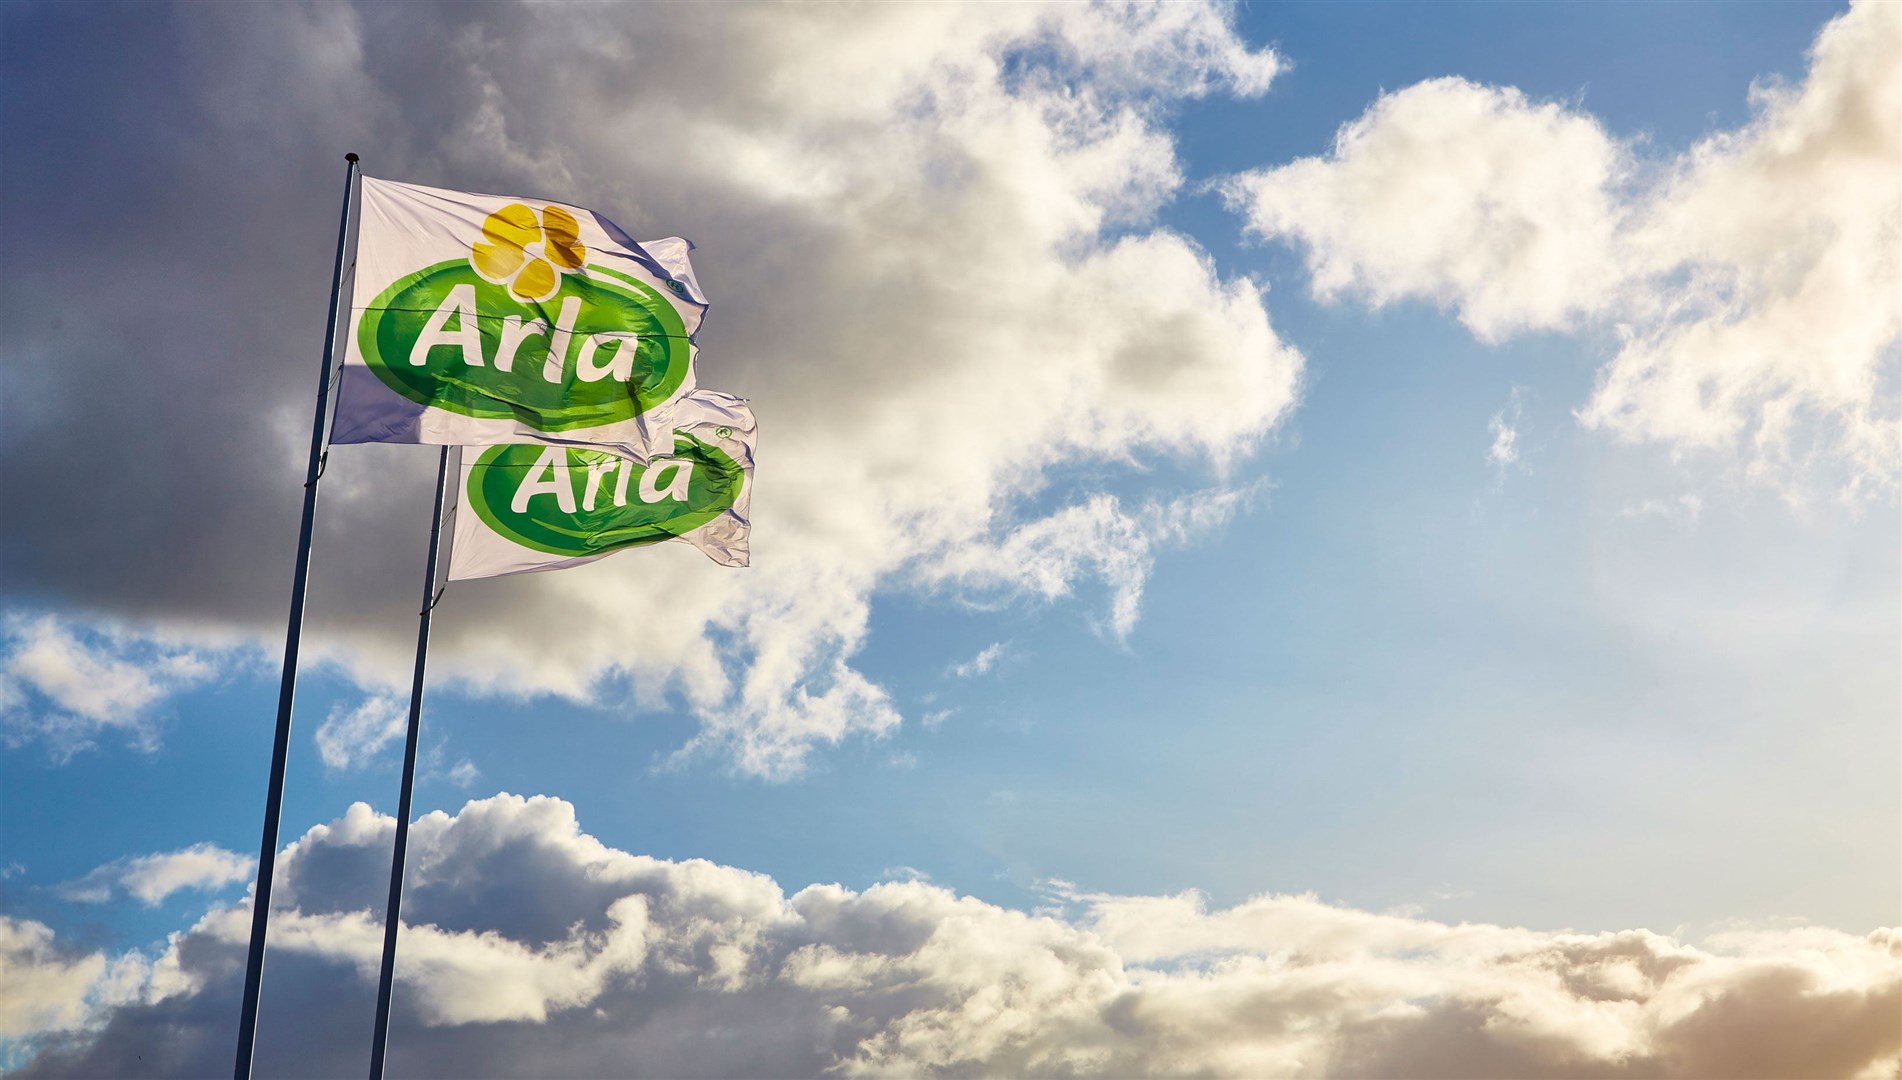 Dairy giant Arla said revenues for its brands had gone down as consumers look to cut costs (Arla/PA)